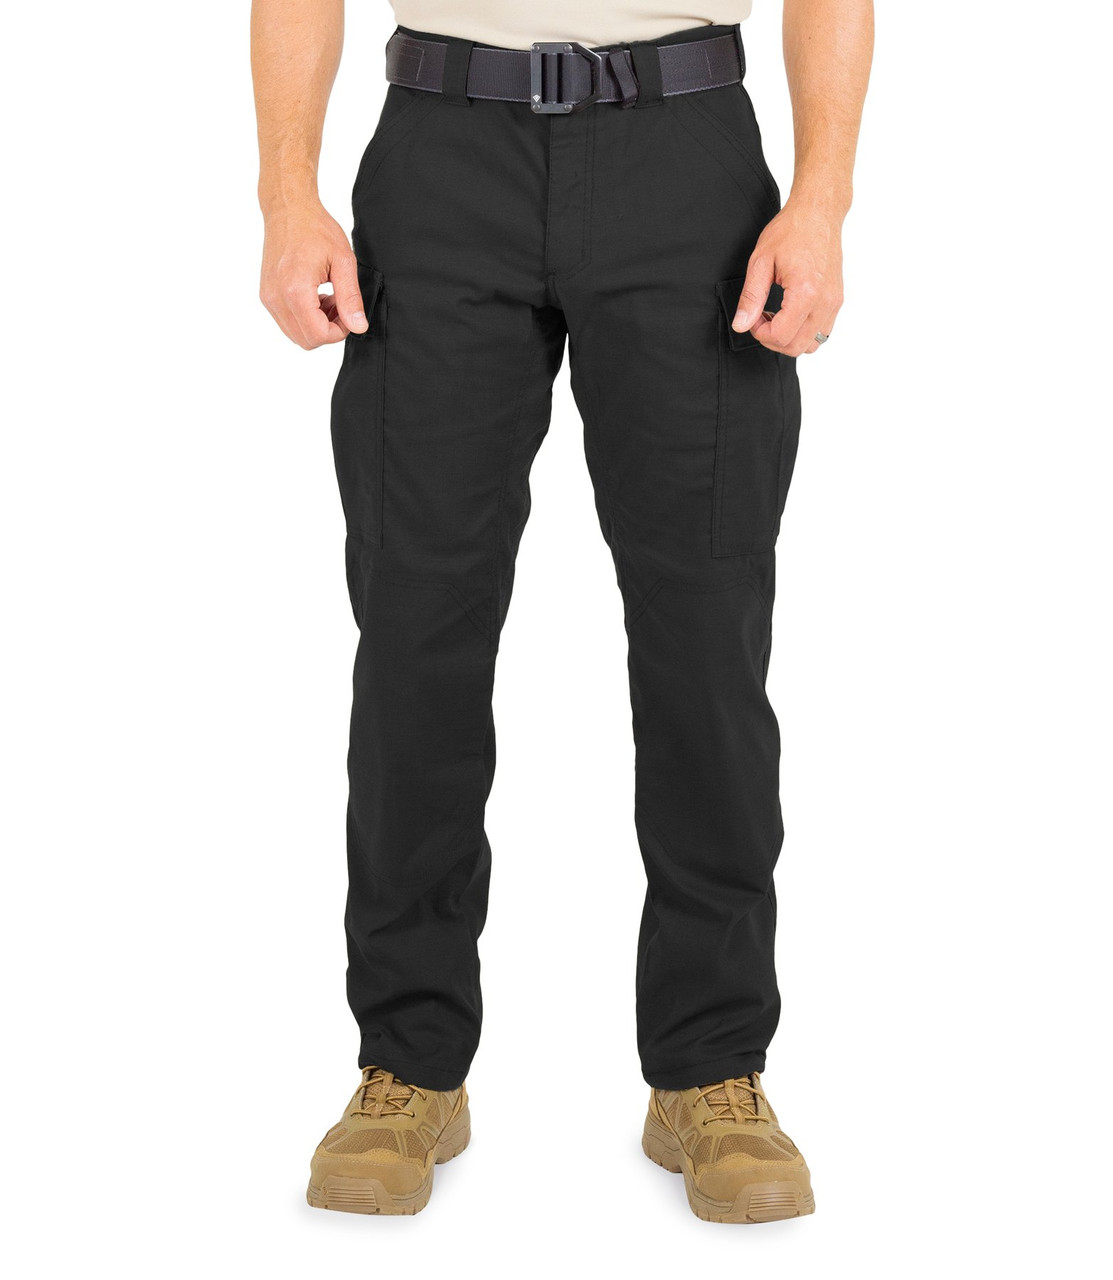 Used BDU Pants, Fast Shipping